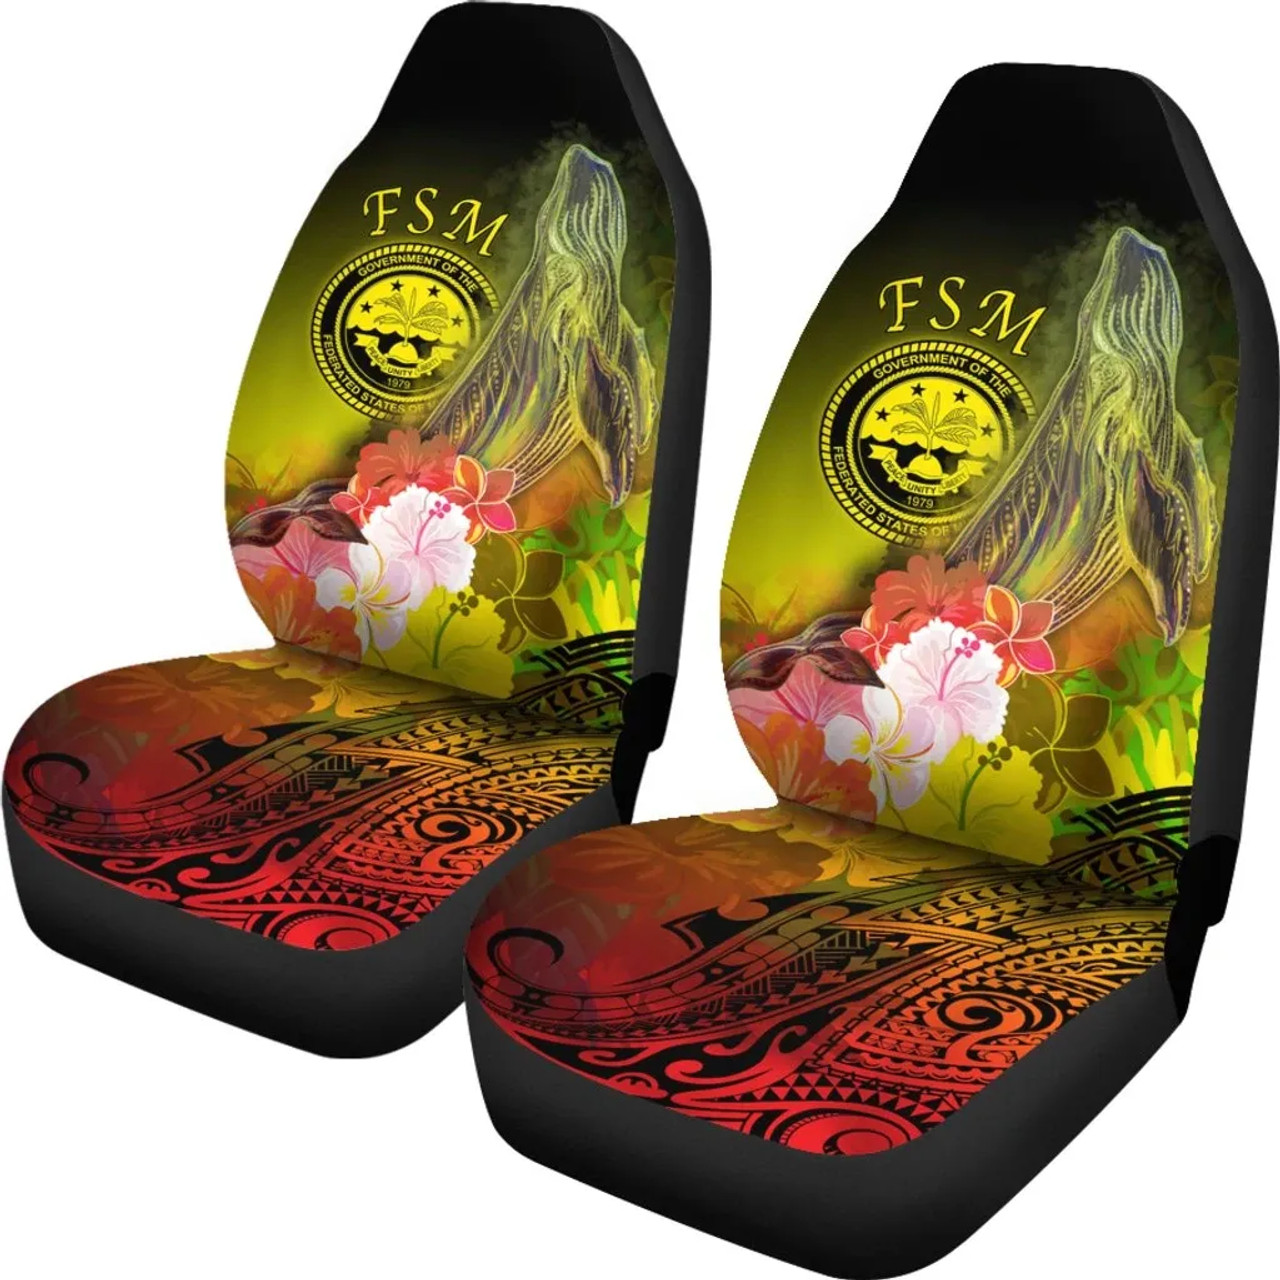 Federated States of Micronesia Car Seat Covers - Humpback Whale with Tropical Flowers (Yellow)